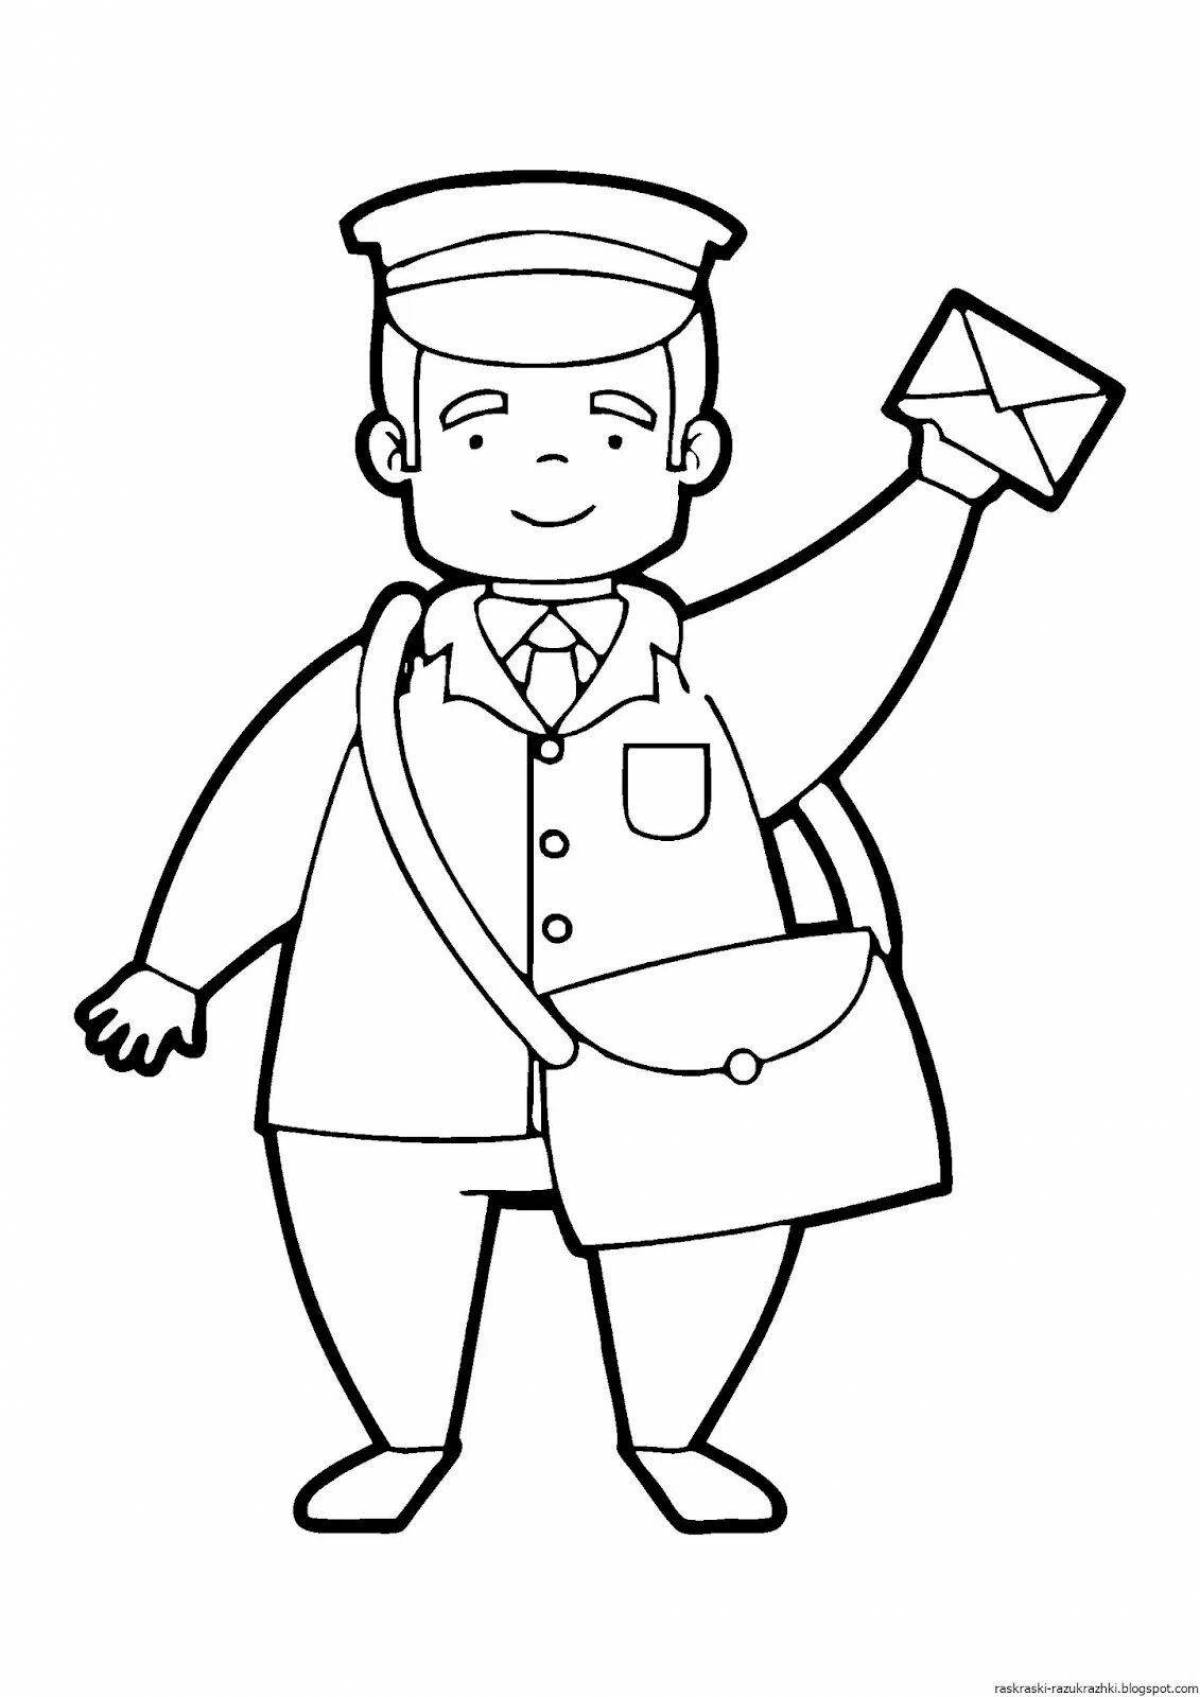 Colorful job coloring pages for young people